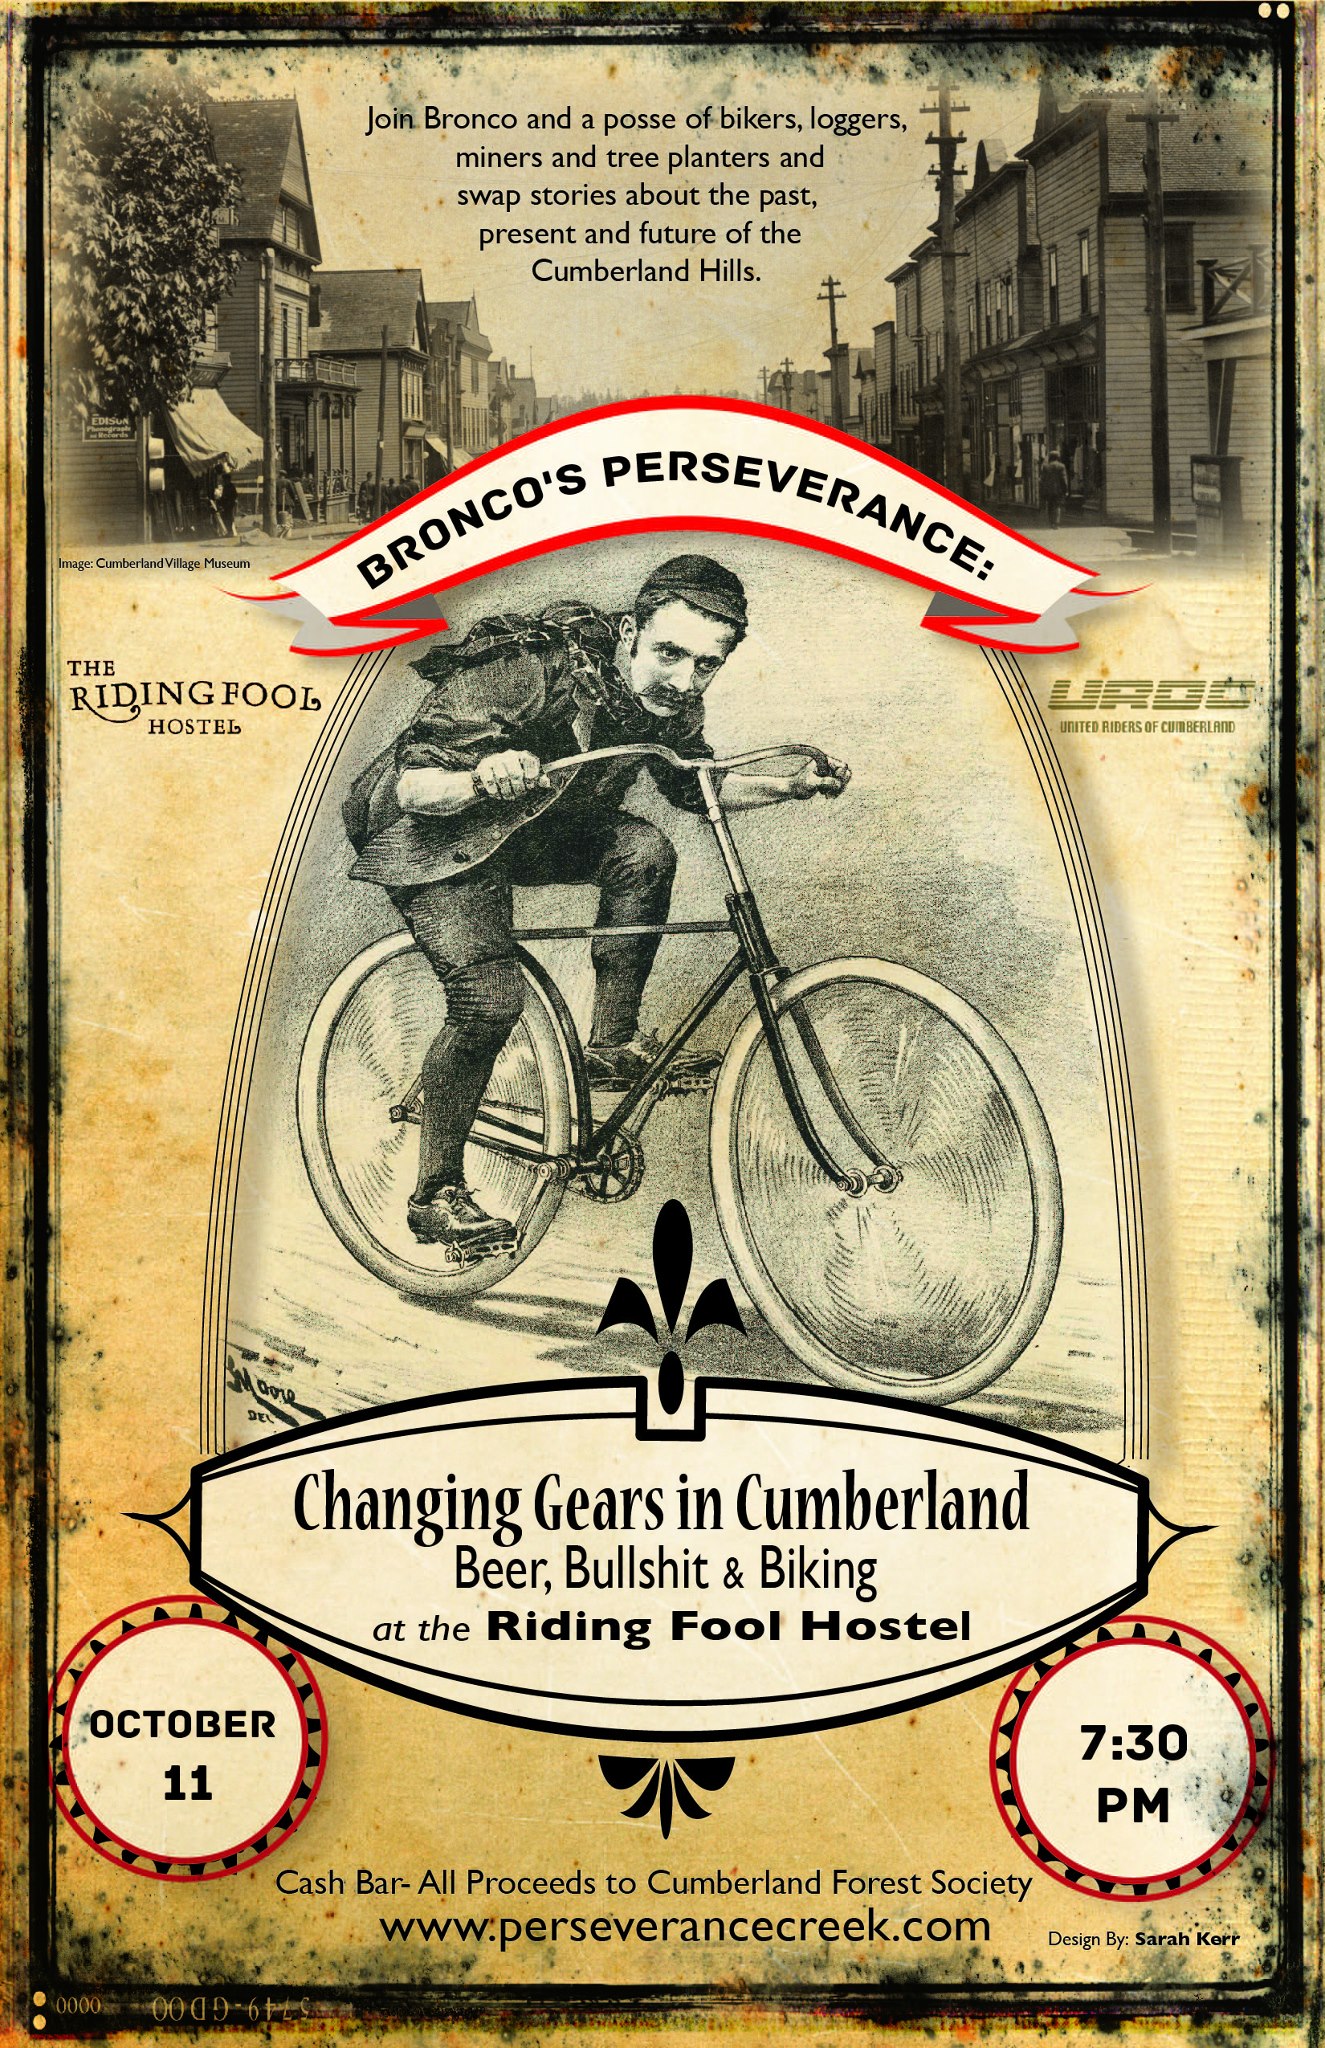 "Beer, Bullshit & Biking" Bronco's Perseverance: Changing Gears in Cumberland. Swap stories about the past, present & future of the Cumberland Hills - Currently Cumberland